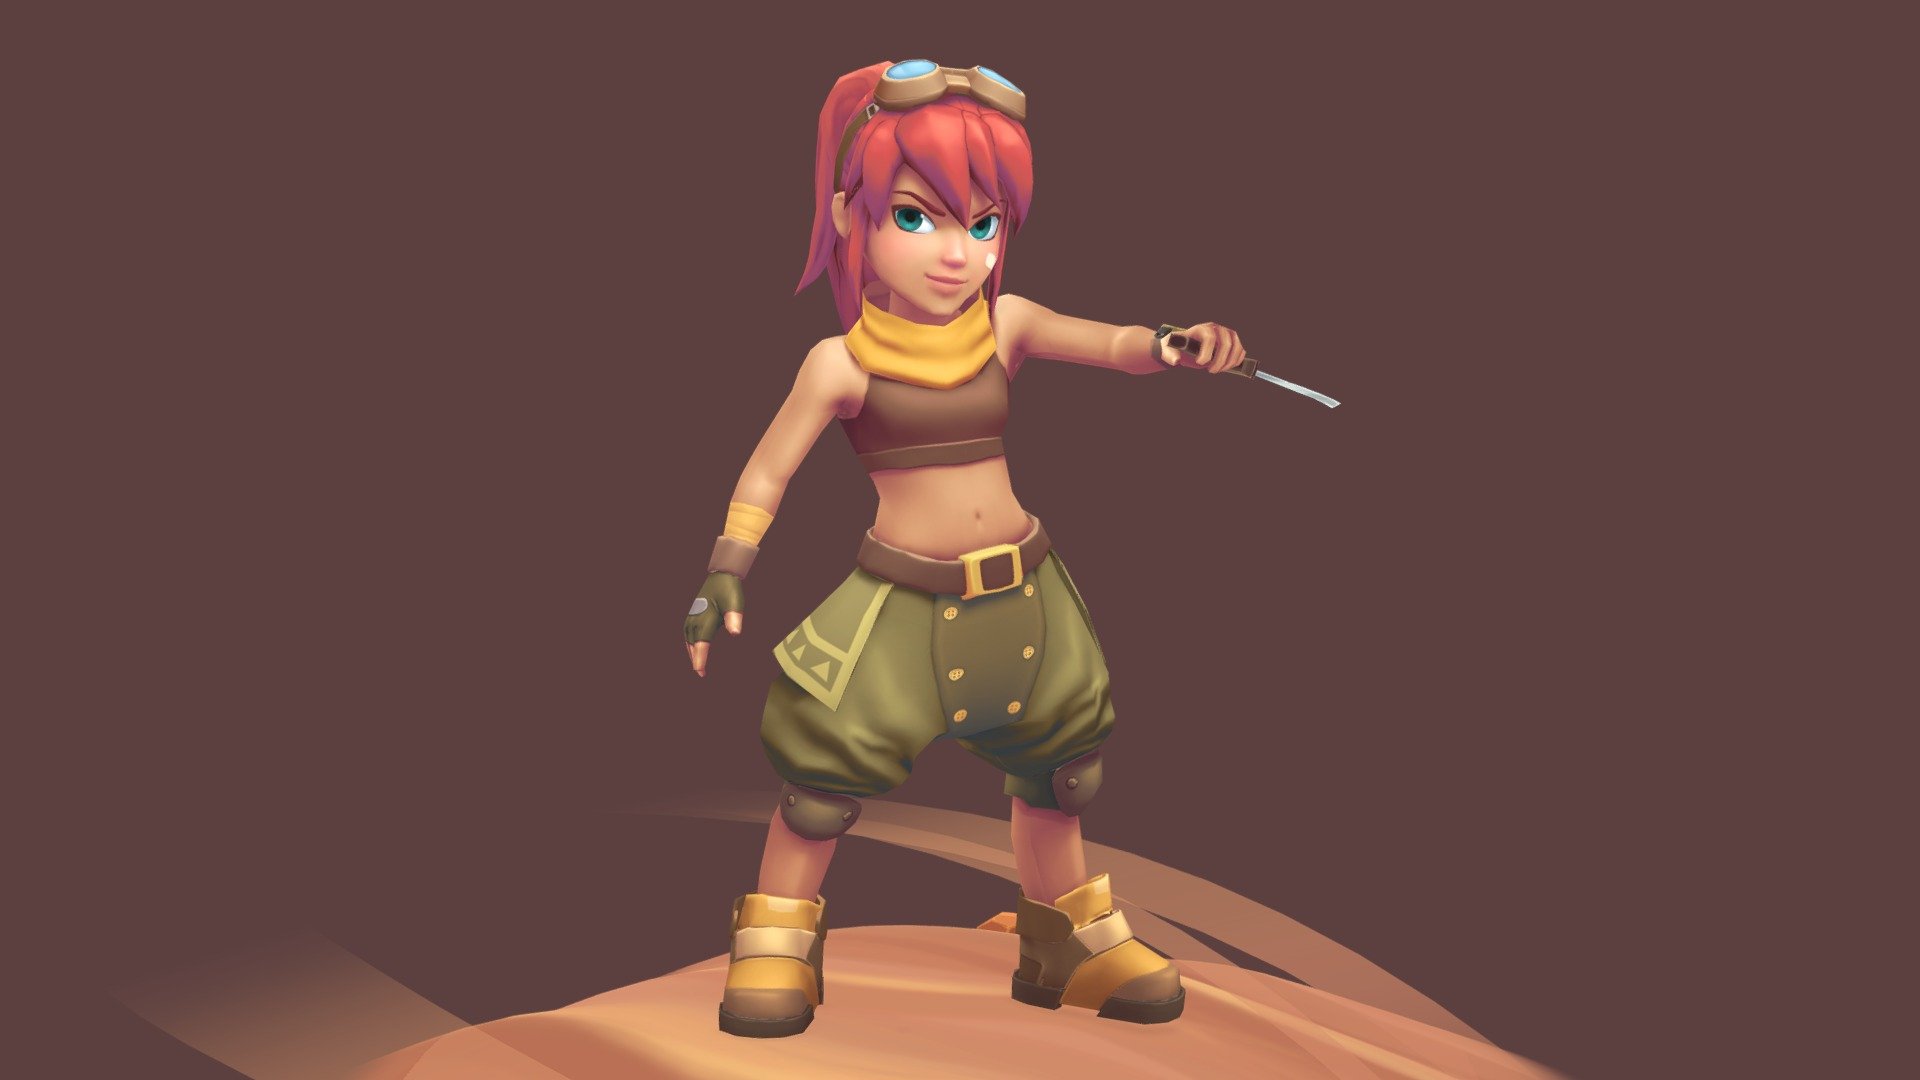 Character for the mobile game &ldquo;Stardust Battle